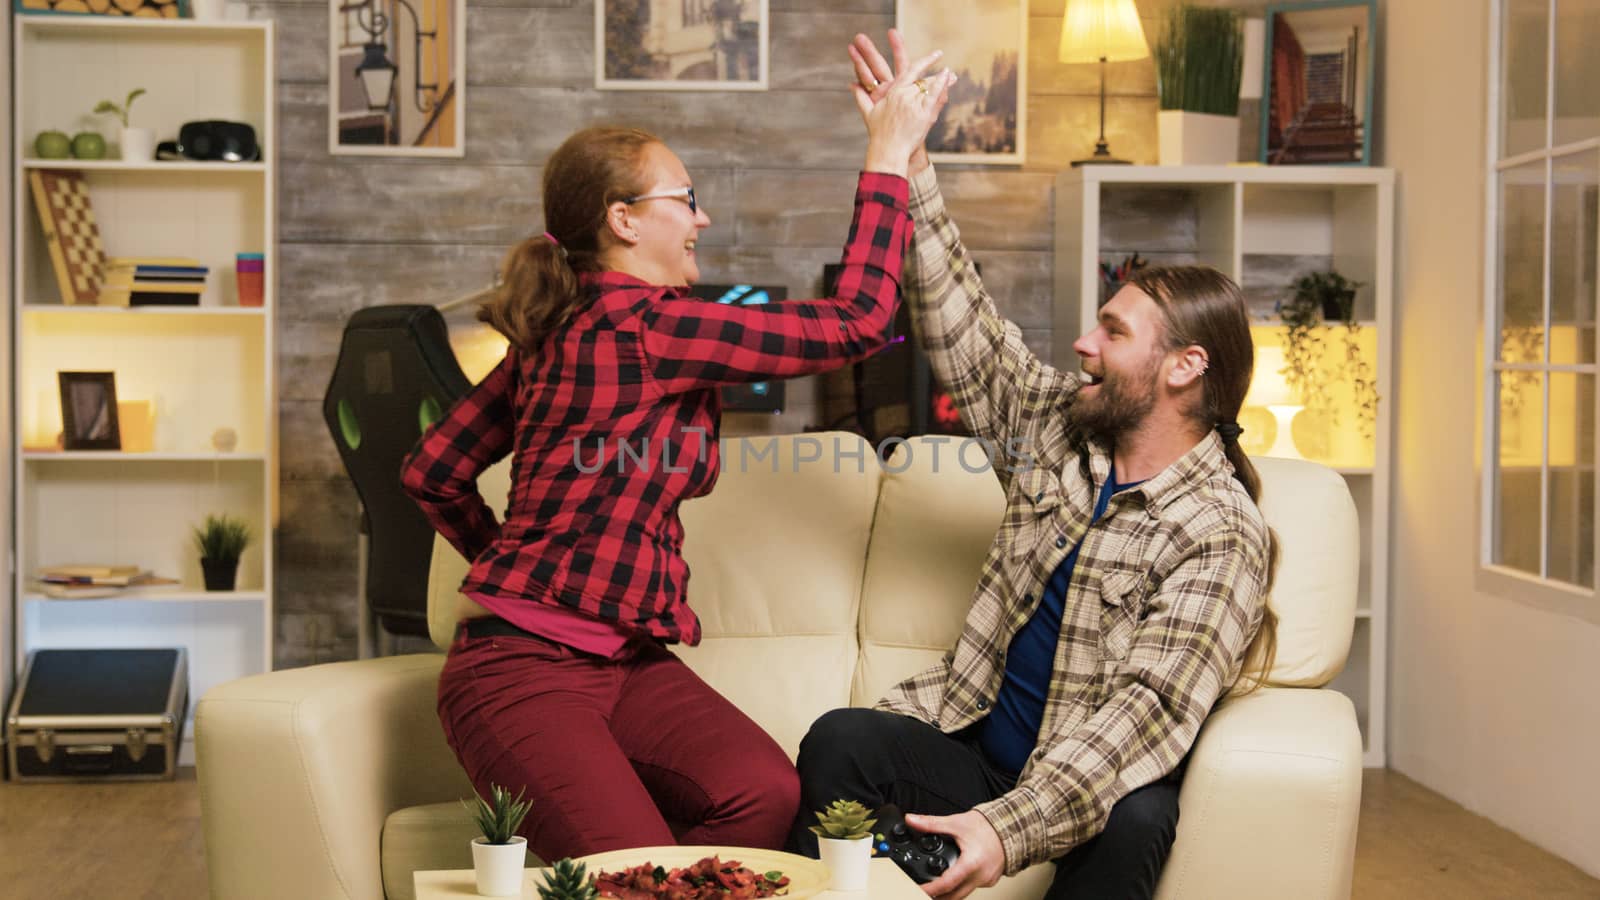 Couple celebrating victory while playing video games using wireless controllers and giving high five.